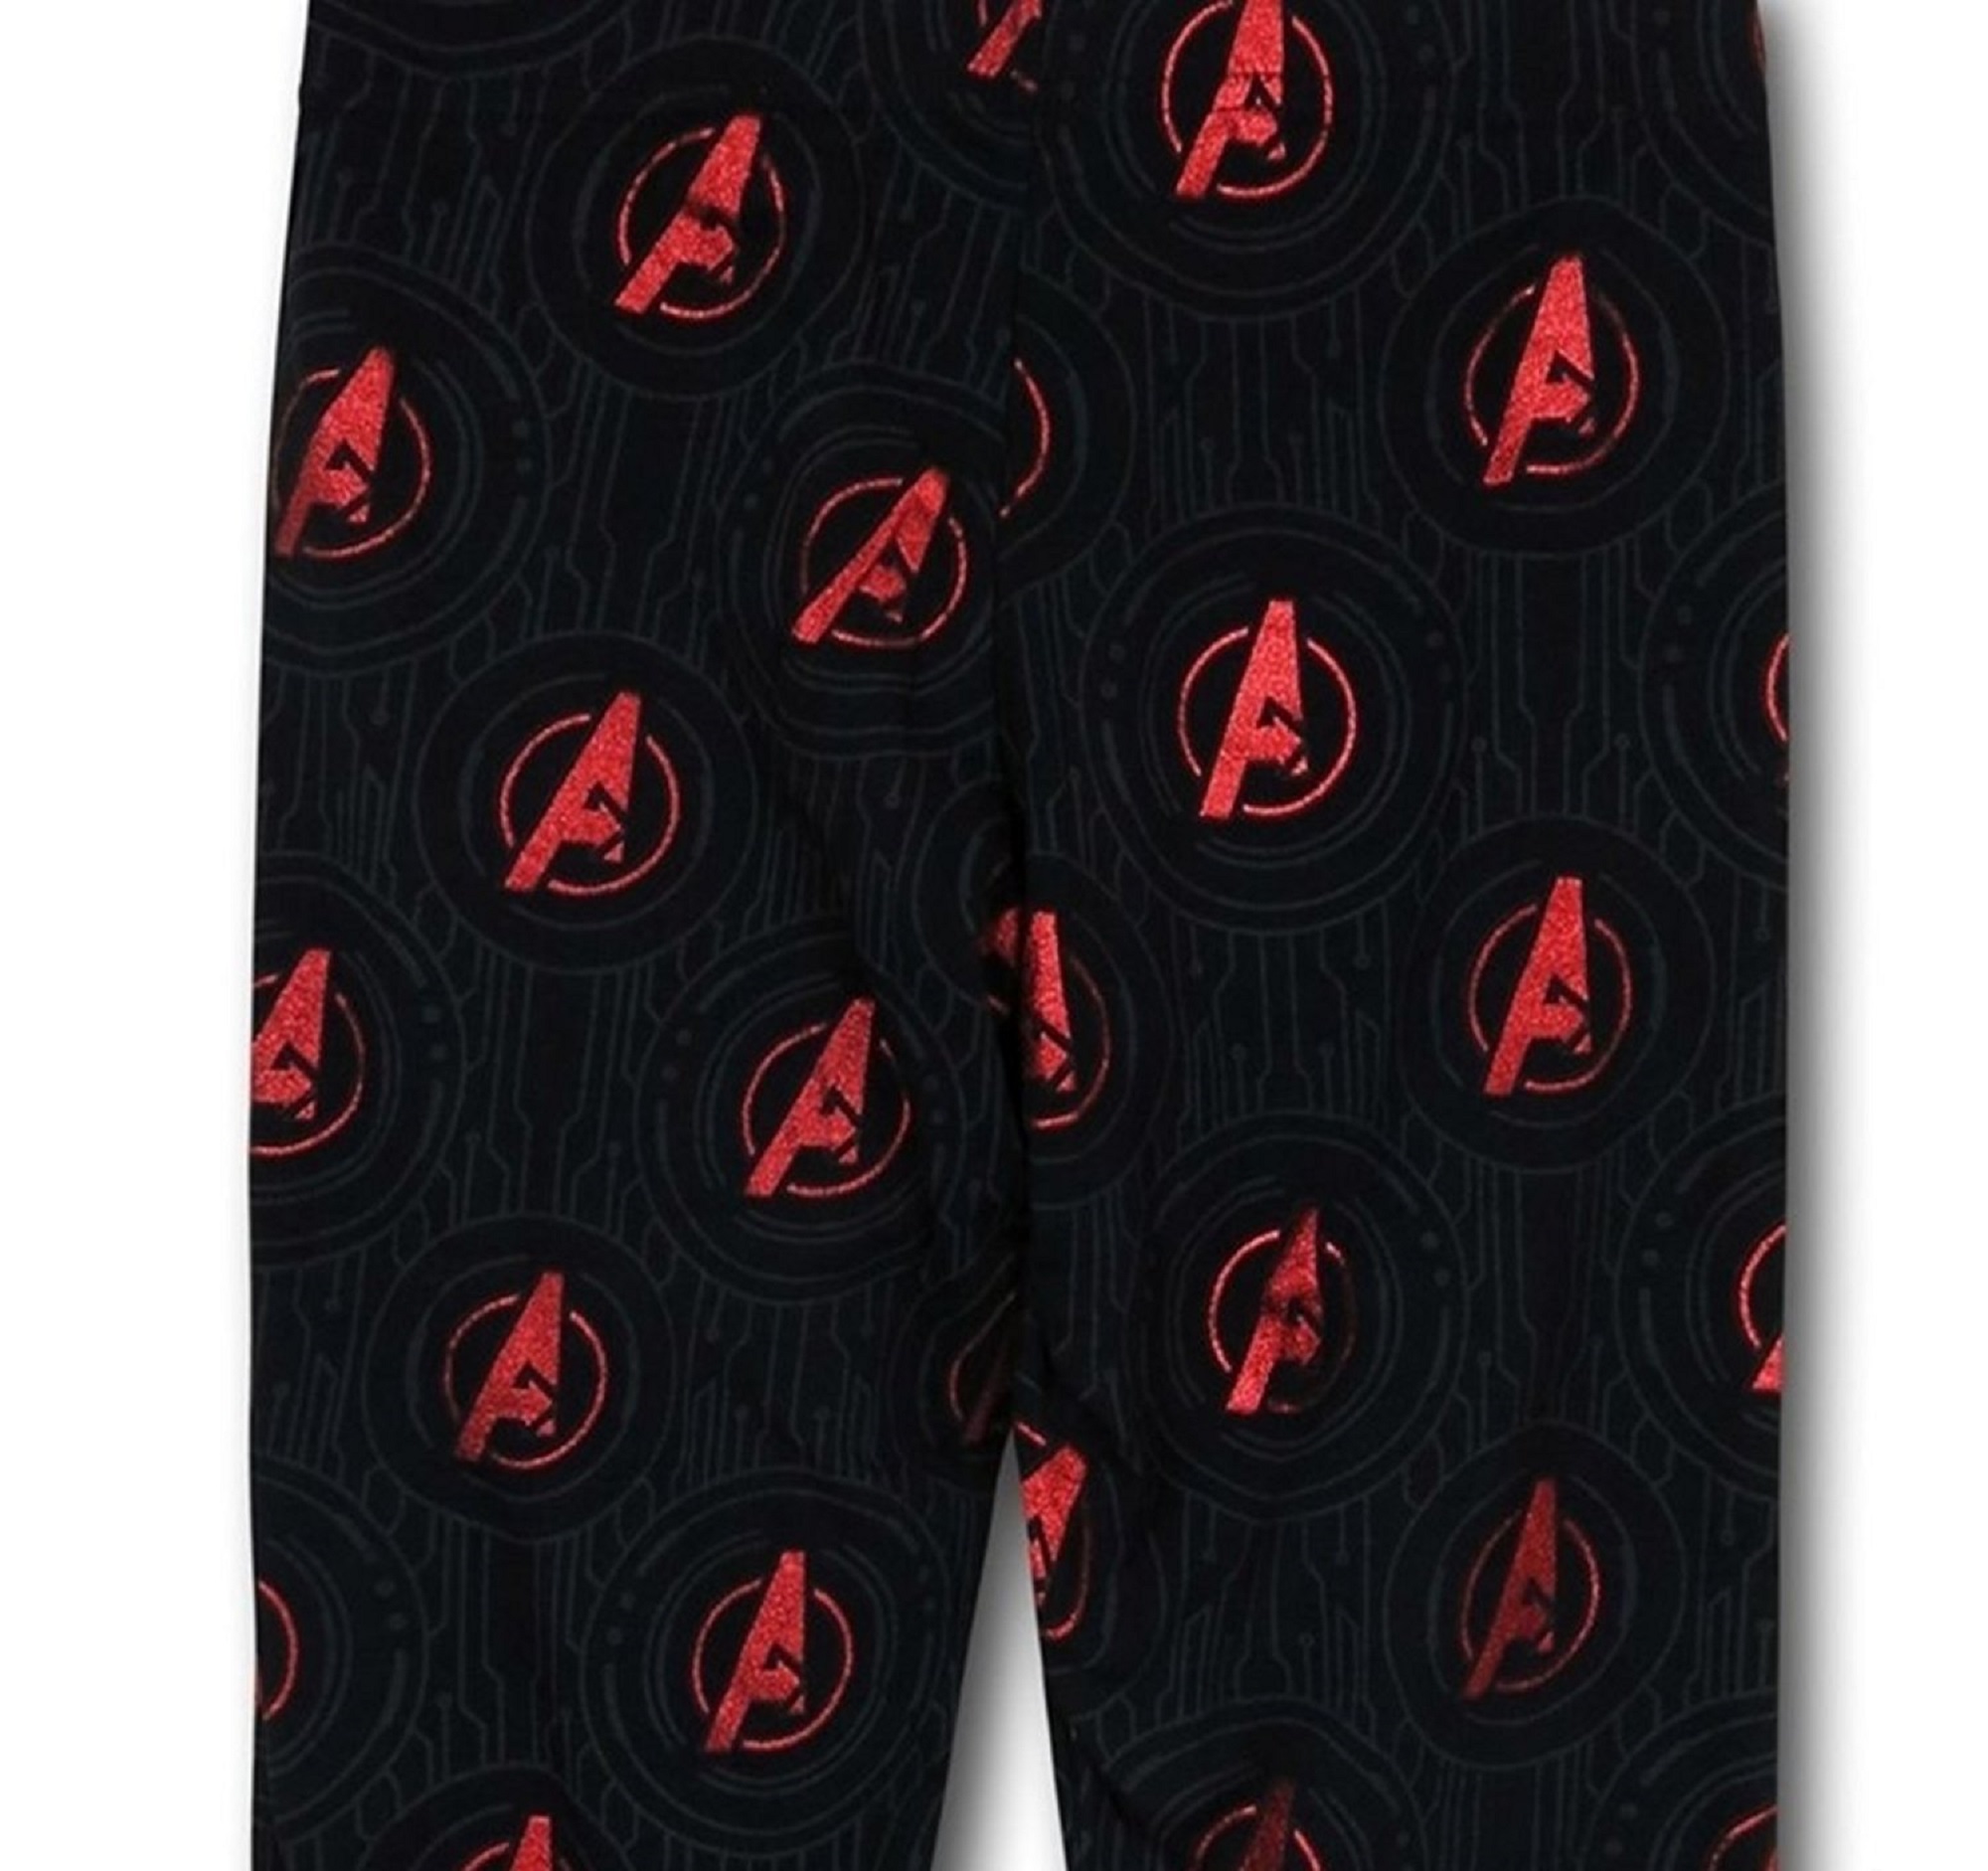 Officially Licensed Marvel Avengers Age of Ultron Symbol Ankle-Length Teen Juniors Leggings (Size Large) - image 4 of 4